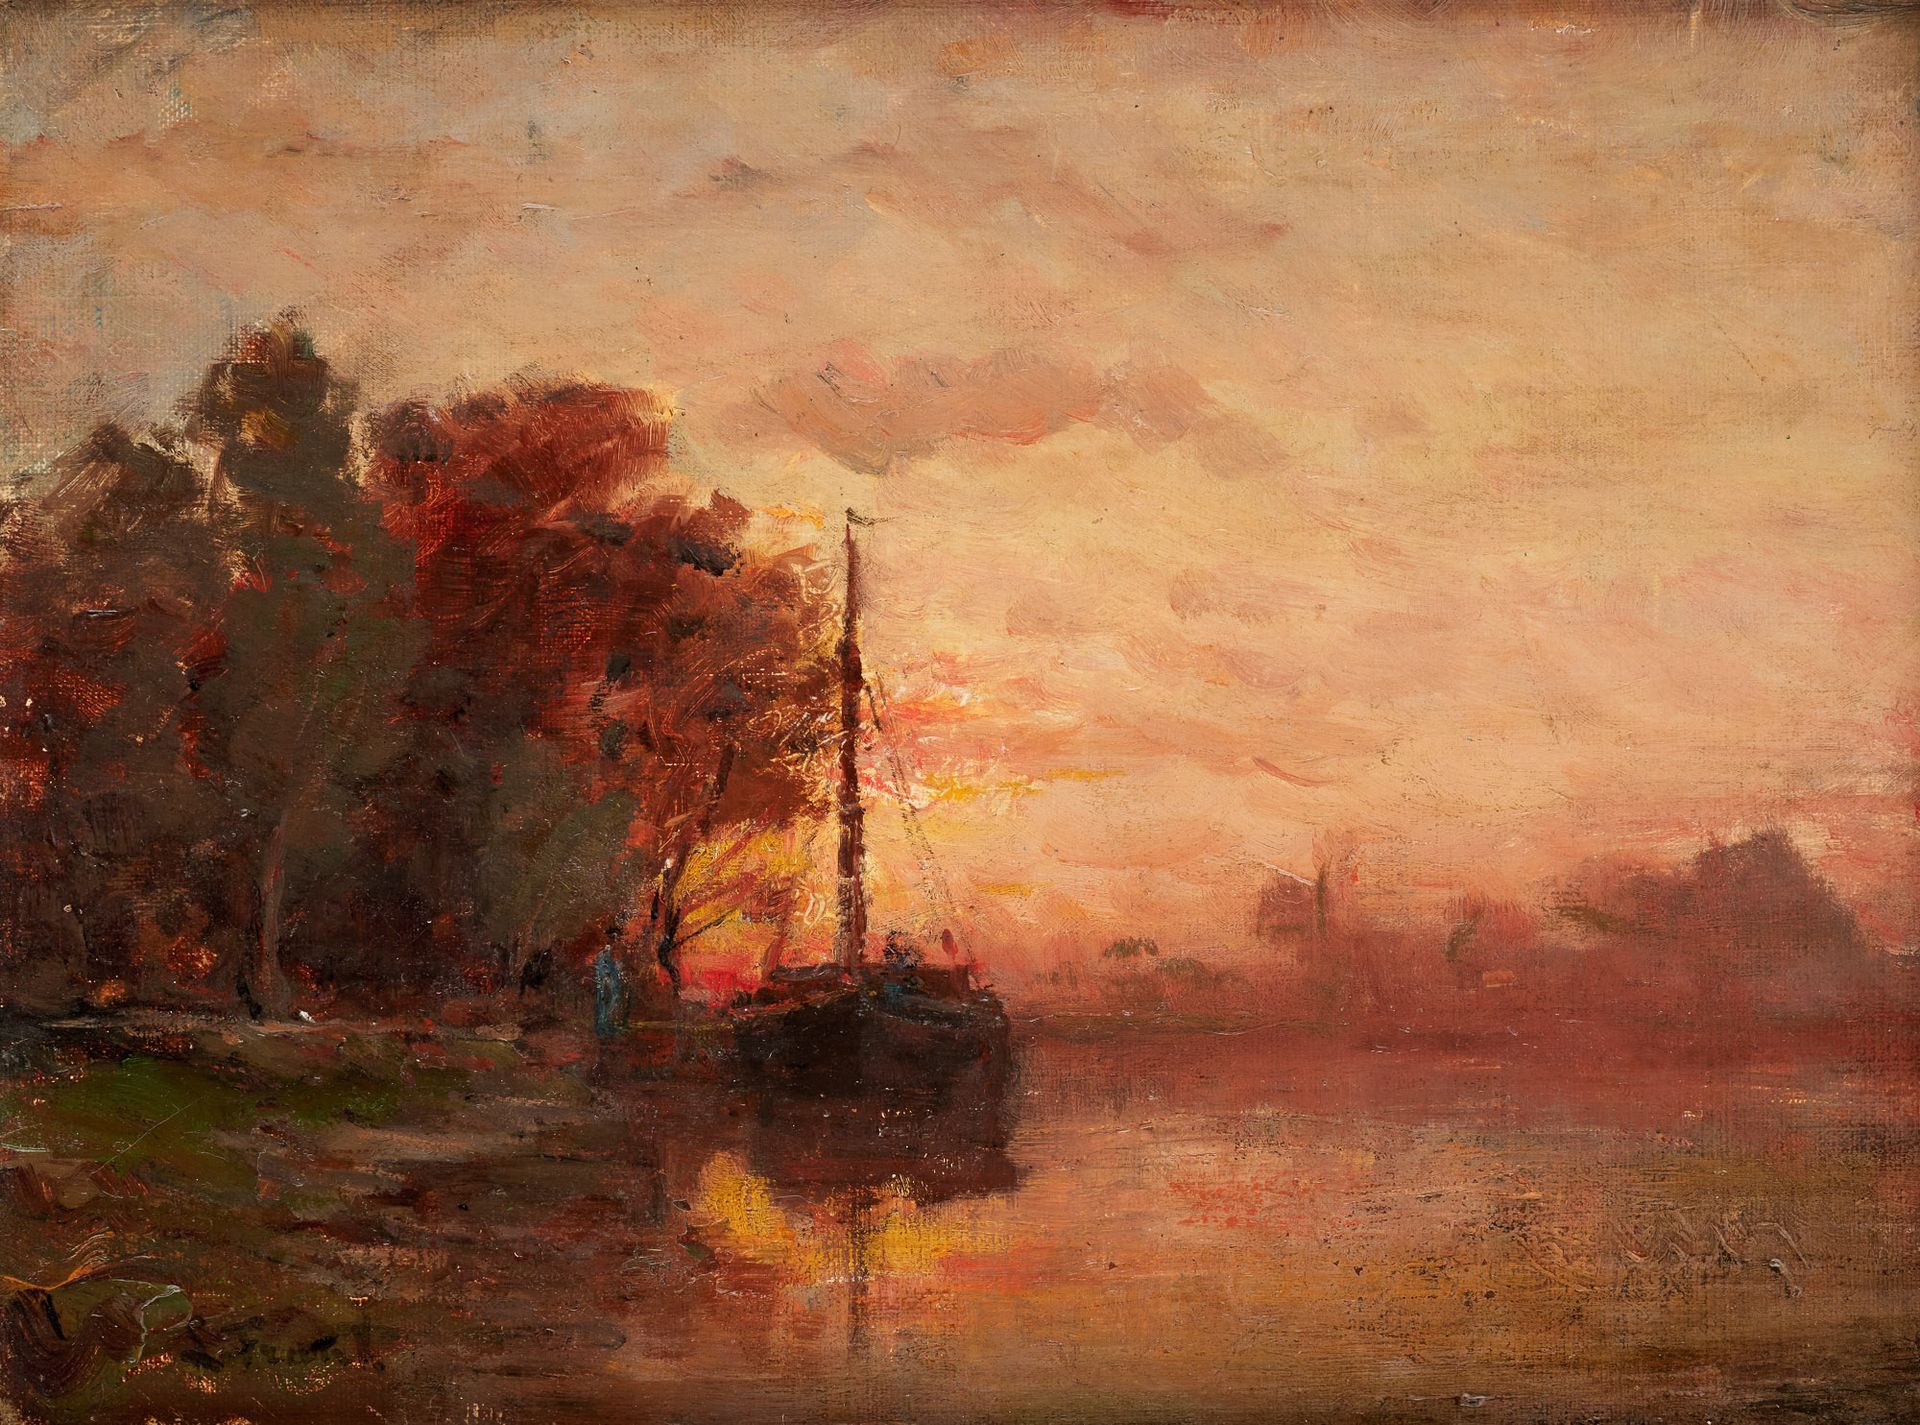 Lucien FRANK École belge (1857-1920) Oil on canvas: Canal side at sunset.

Signe&hellip;